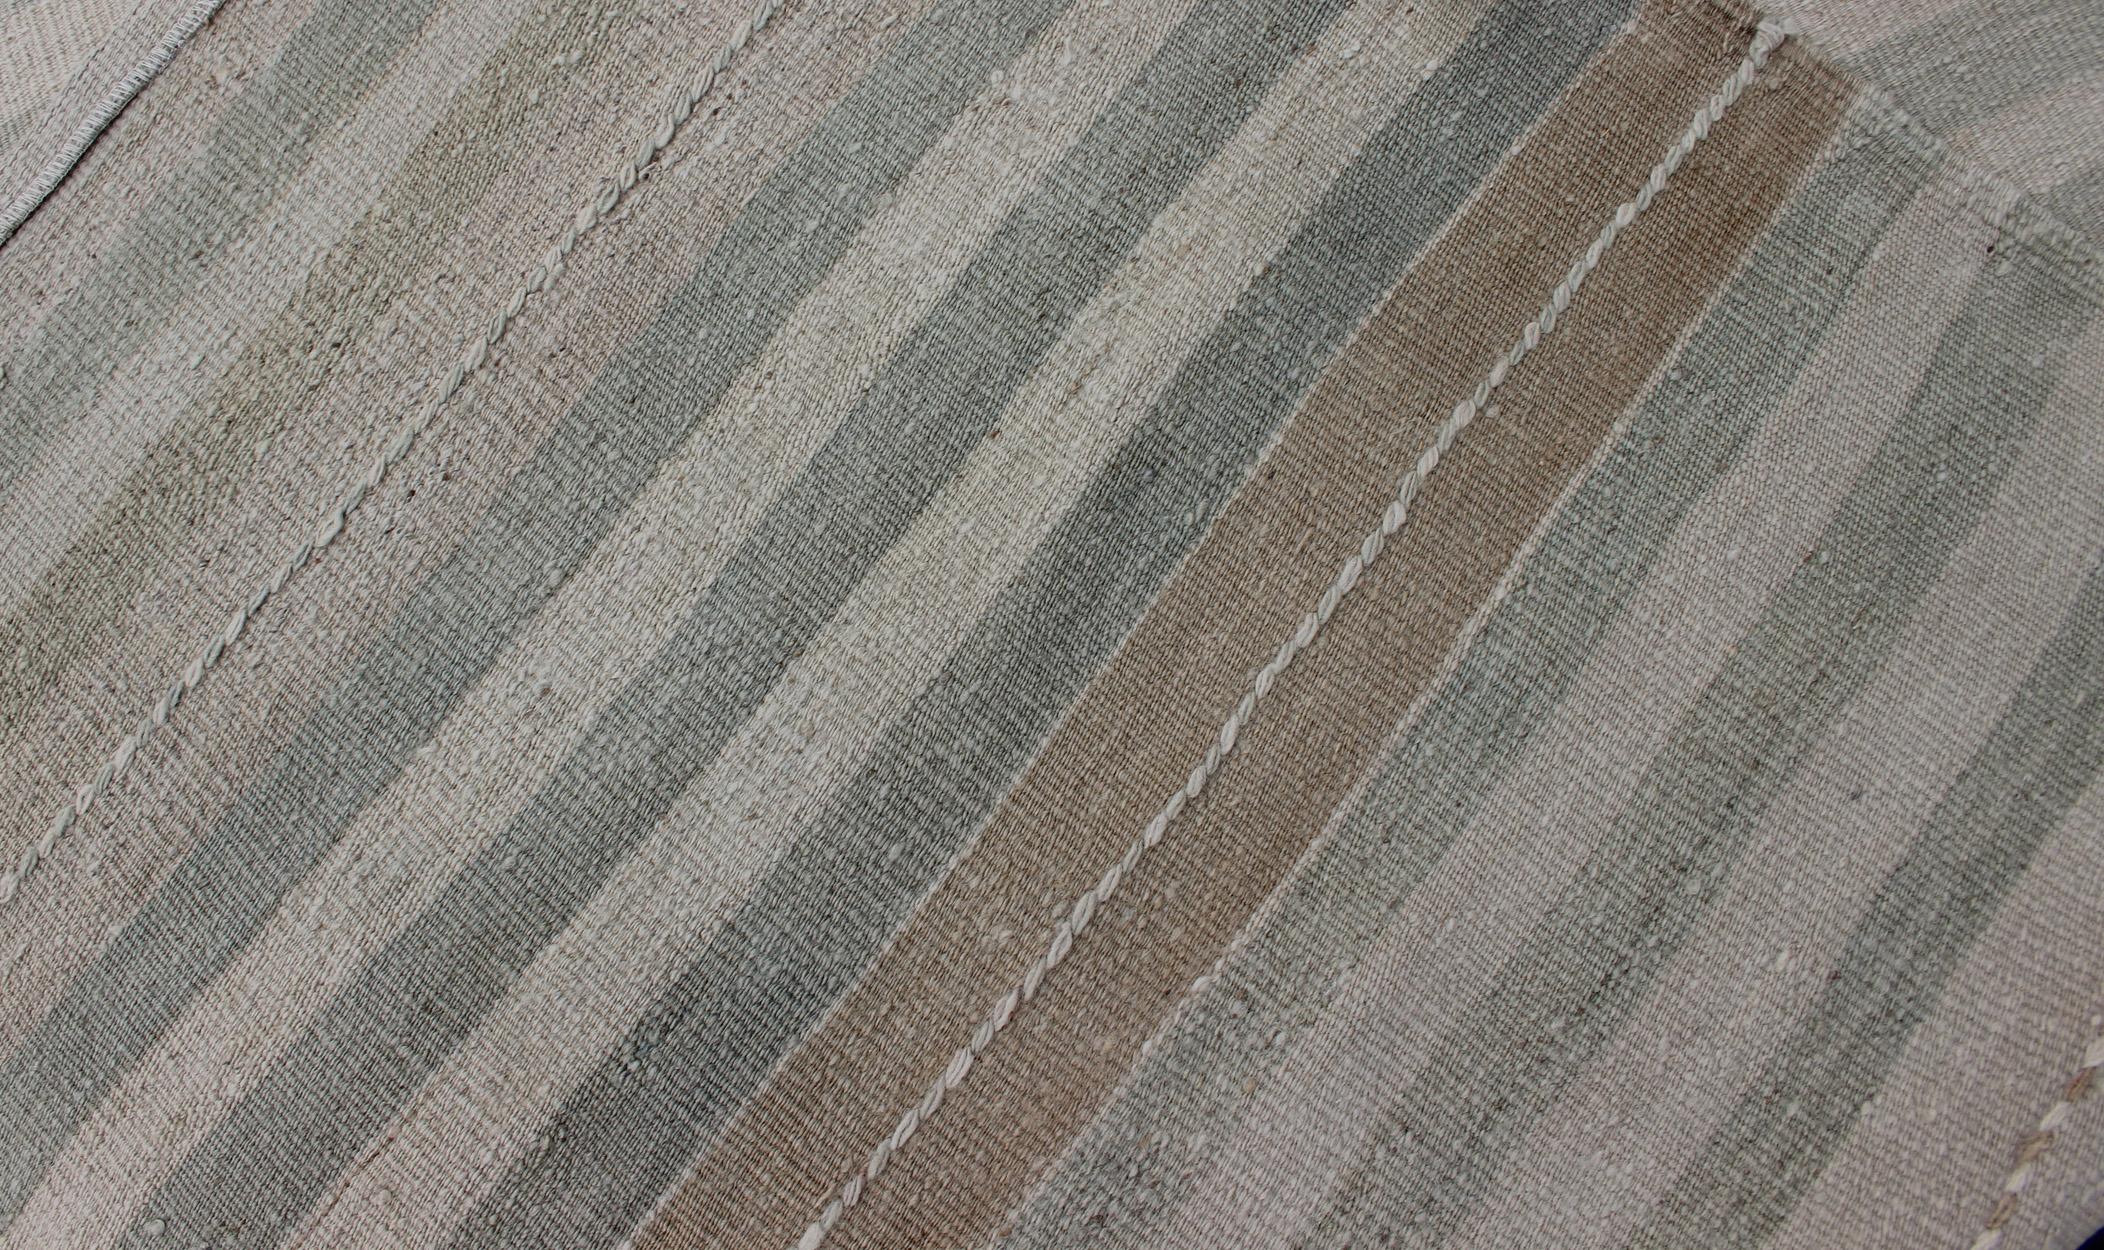 Vintage Turkish Kilim Runner with a Stripe and Modern Design in Neutral Tones For Sale 4